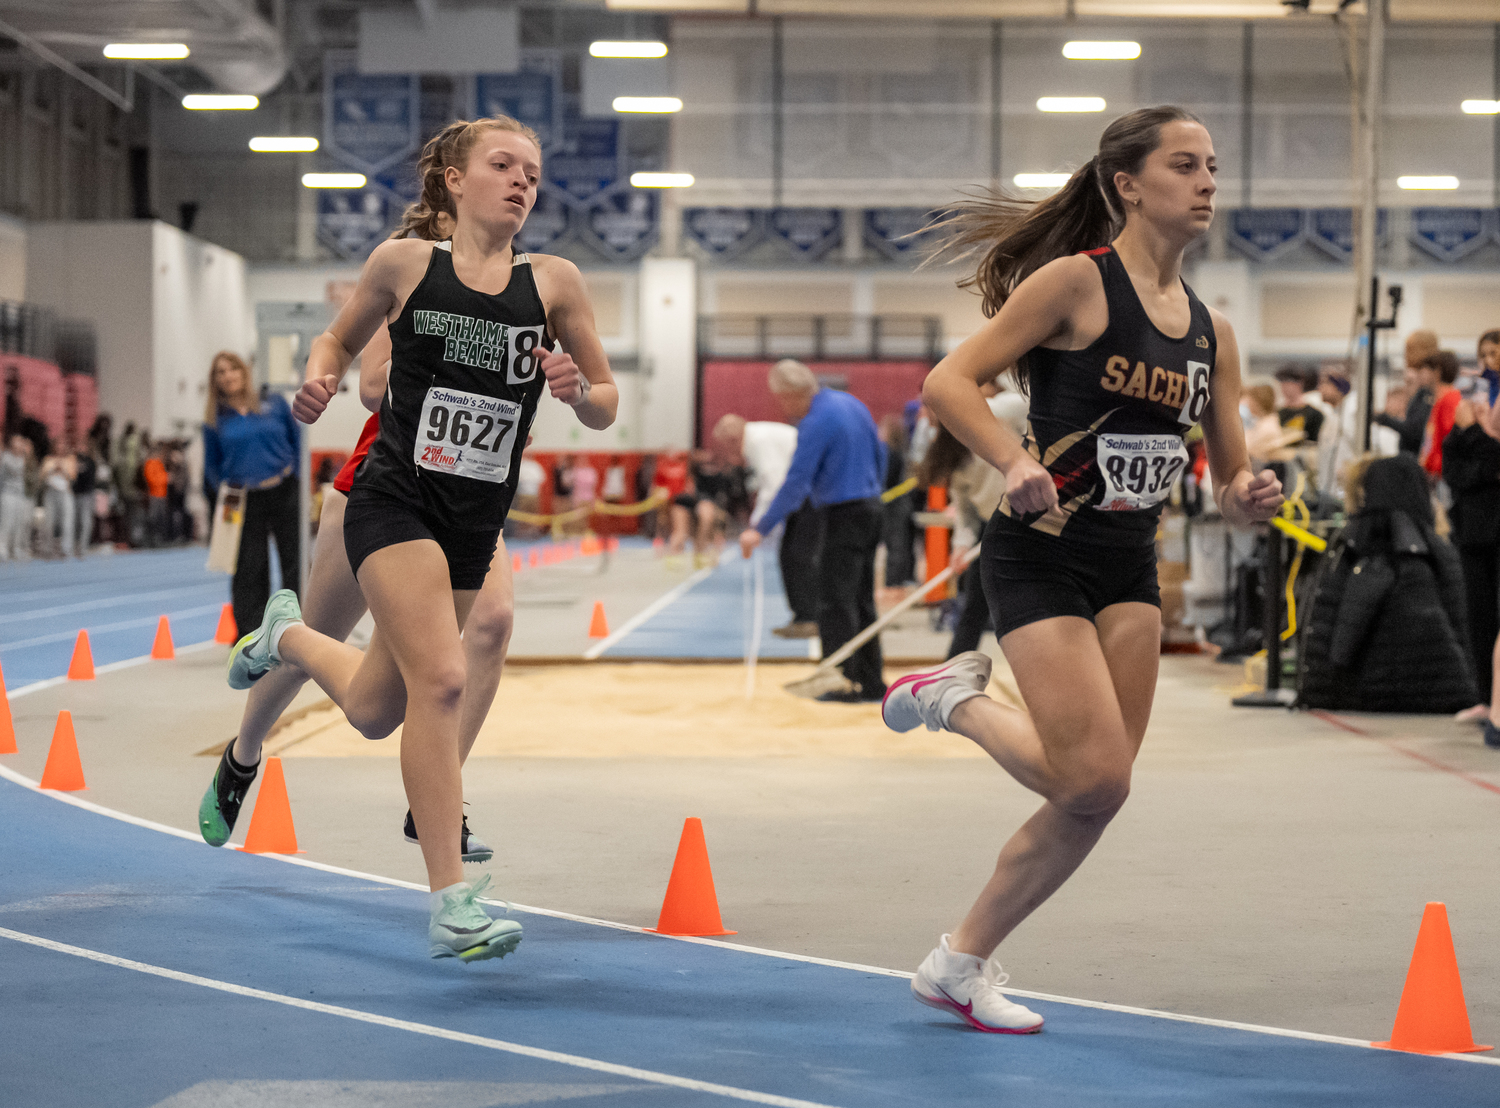 Westhampton Beach eighth-grader Serefina DiBiaso made her debut at the state qualifier last week and placed seventh in the 1,000-meter race.  RON ESPOSITO